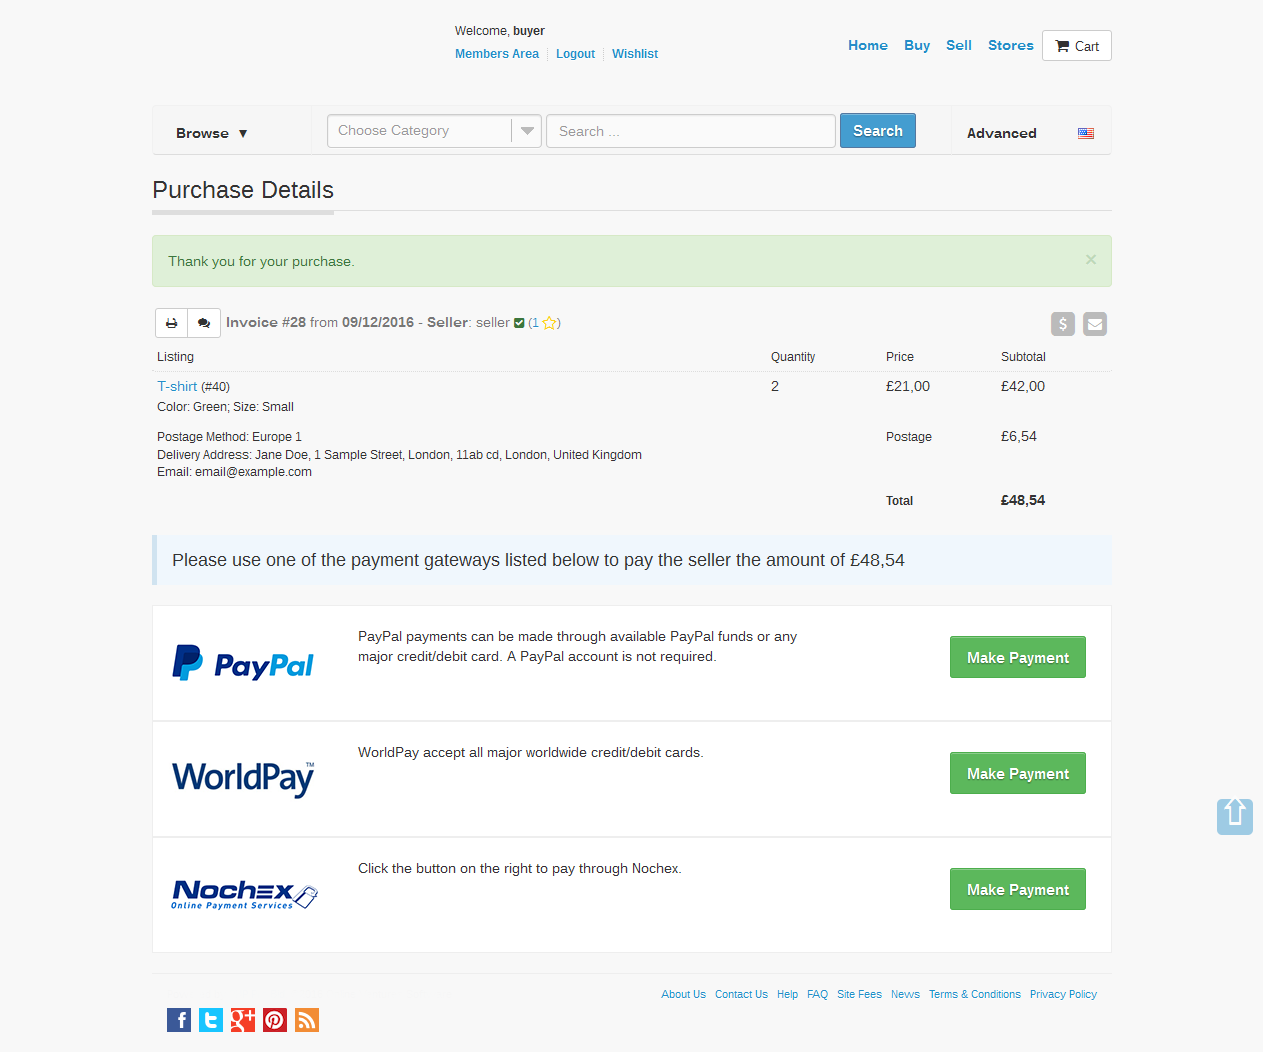 17-custom-fields-make-payment.png